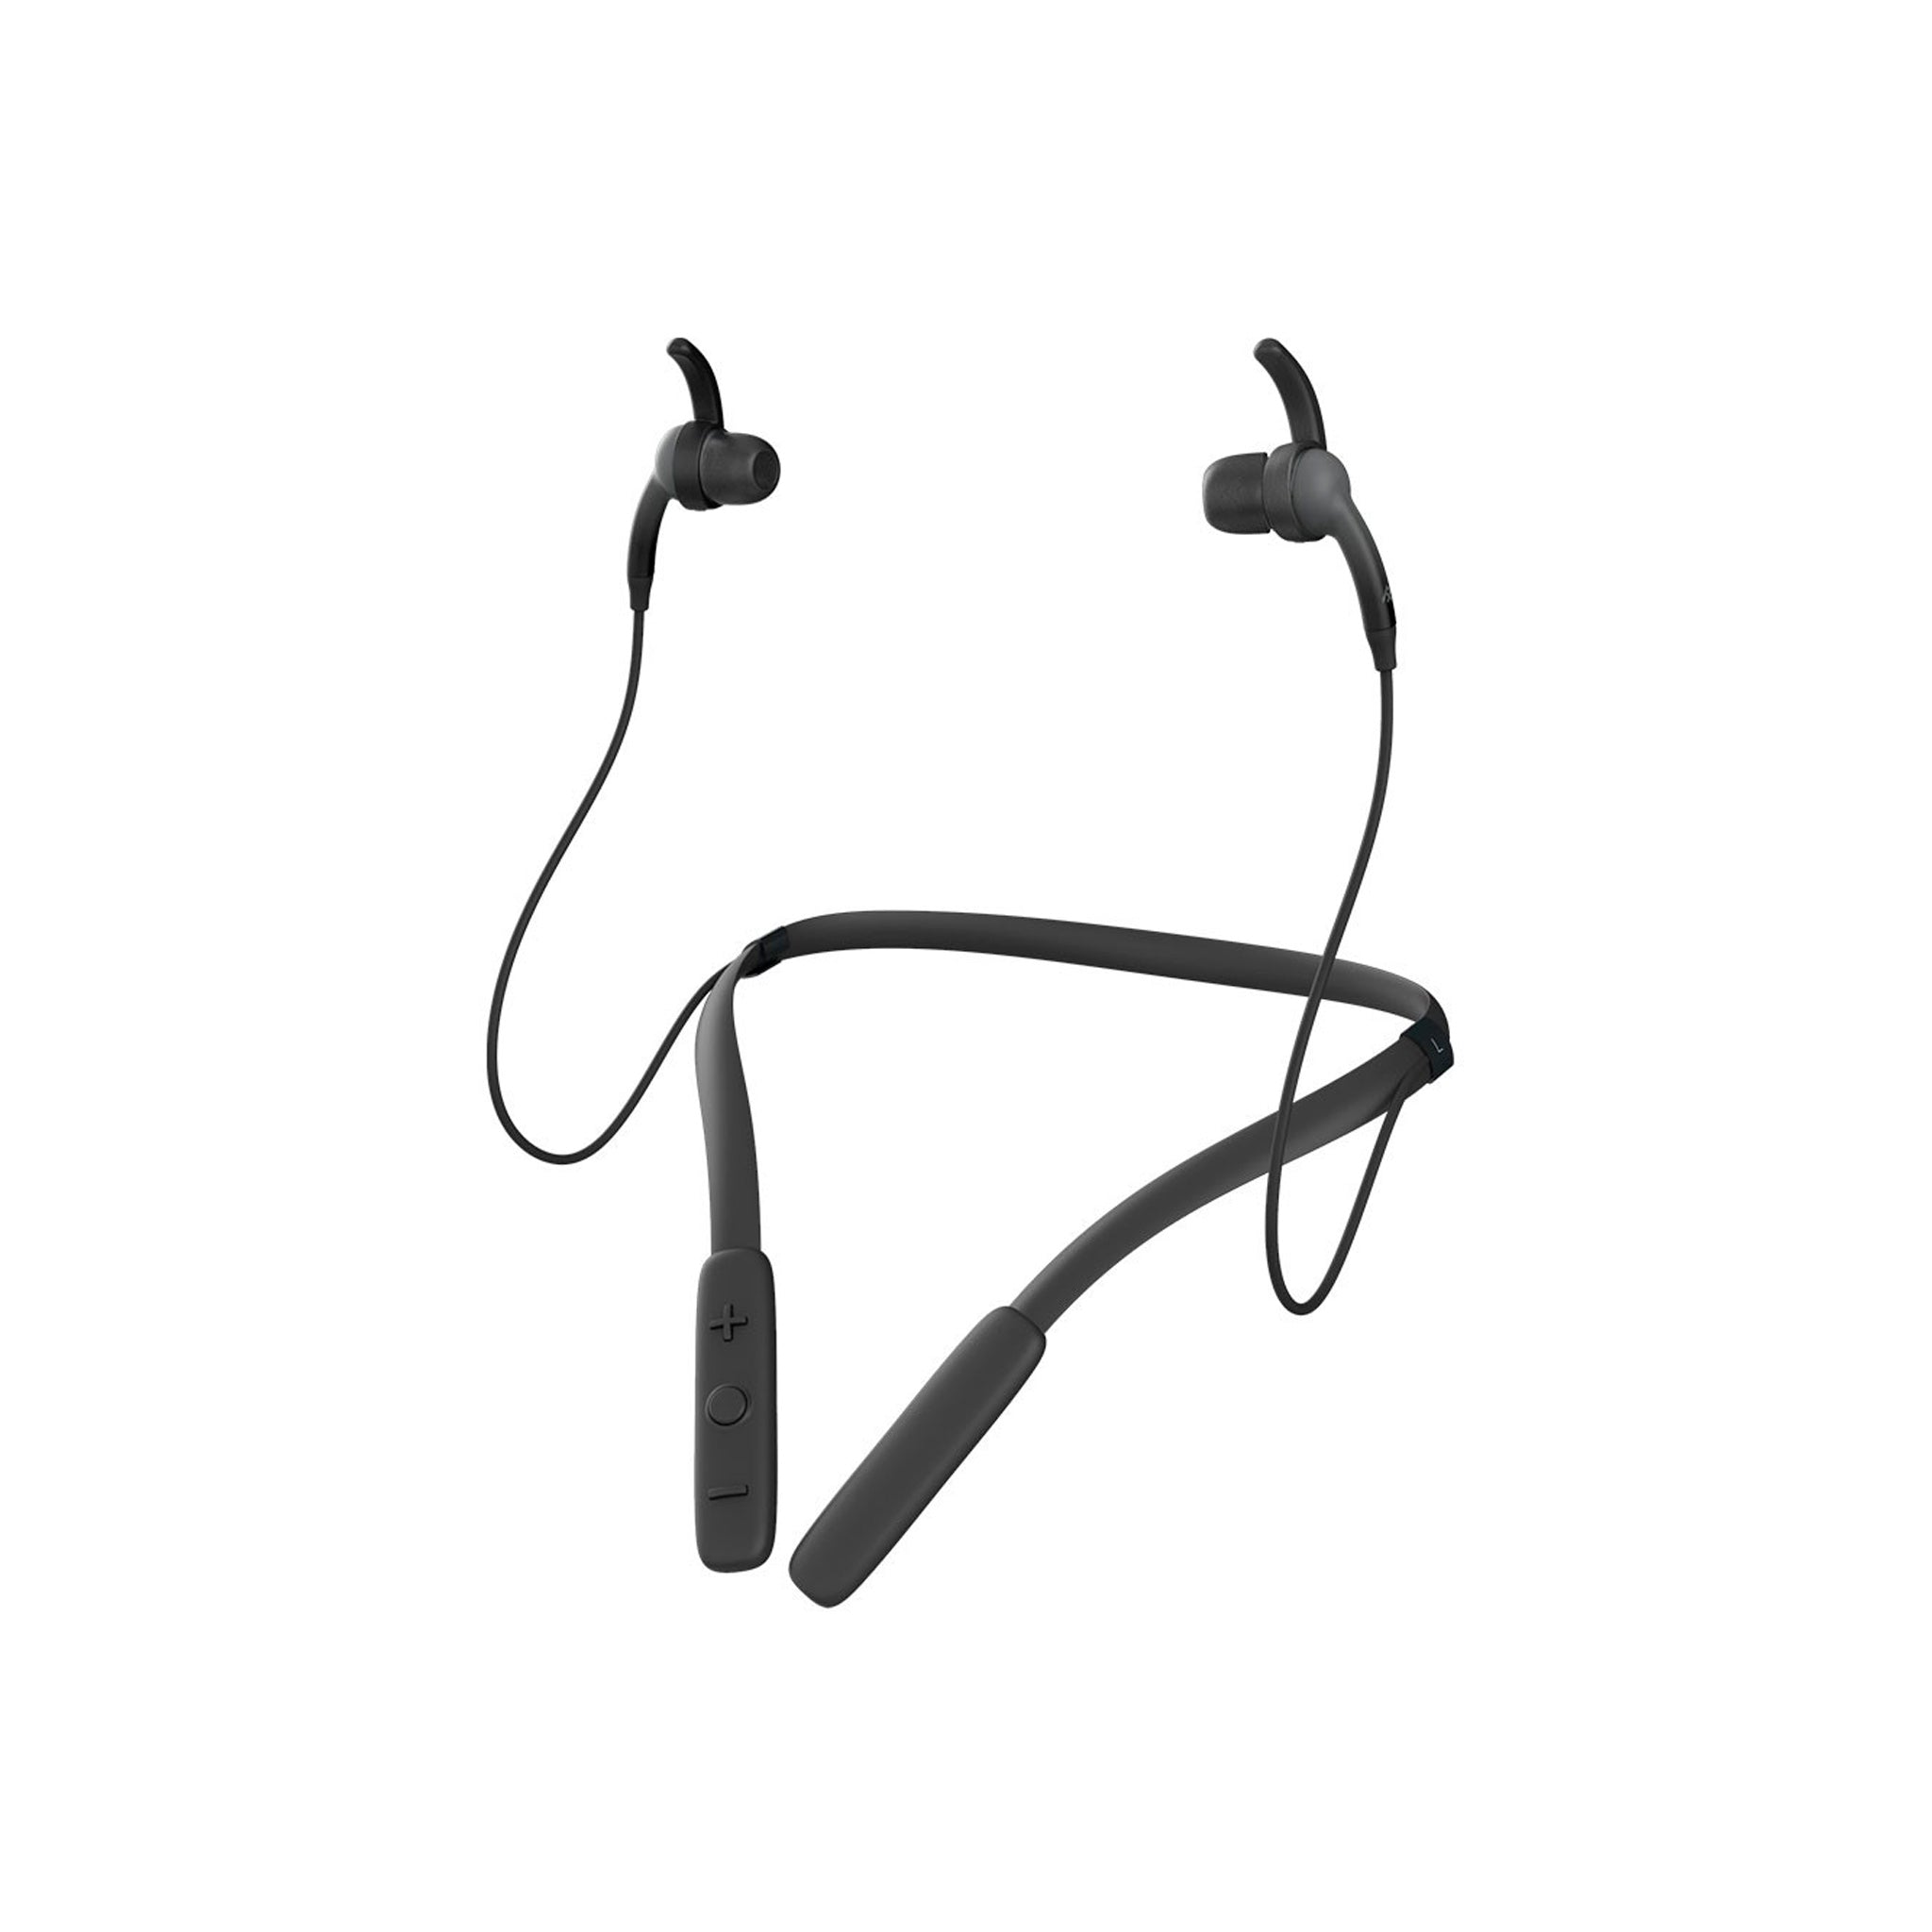 Ifrogz - Flex Force 2 In Ear Bluetooth Headphones - Black And Gray